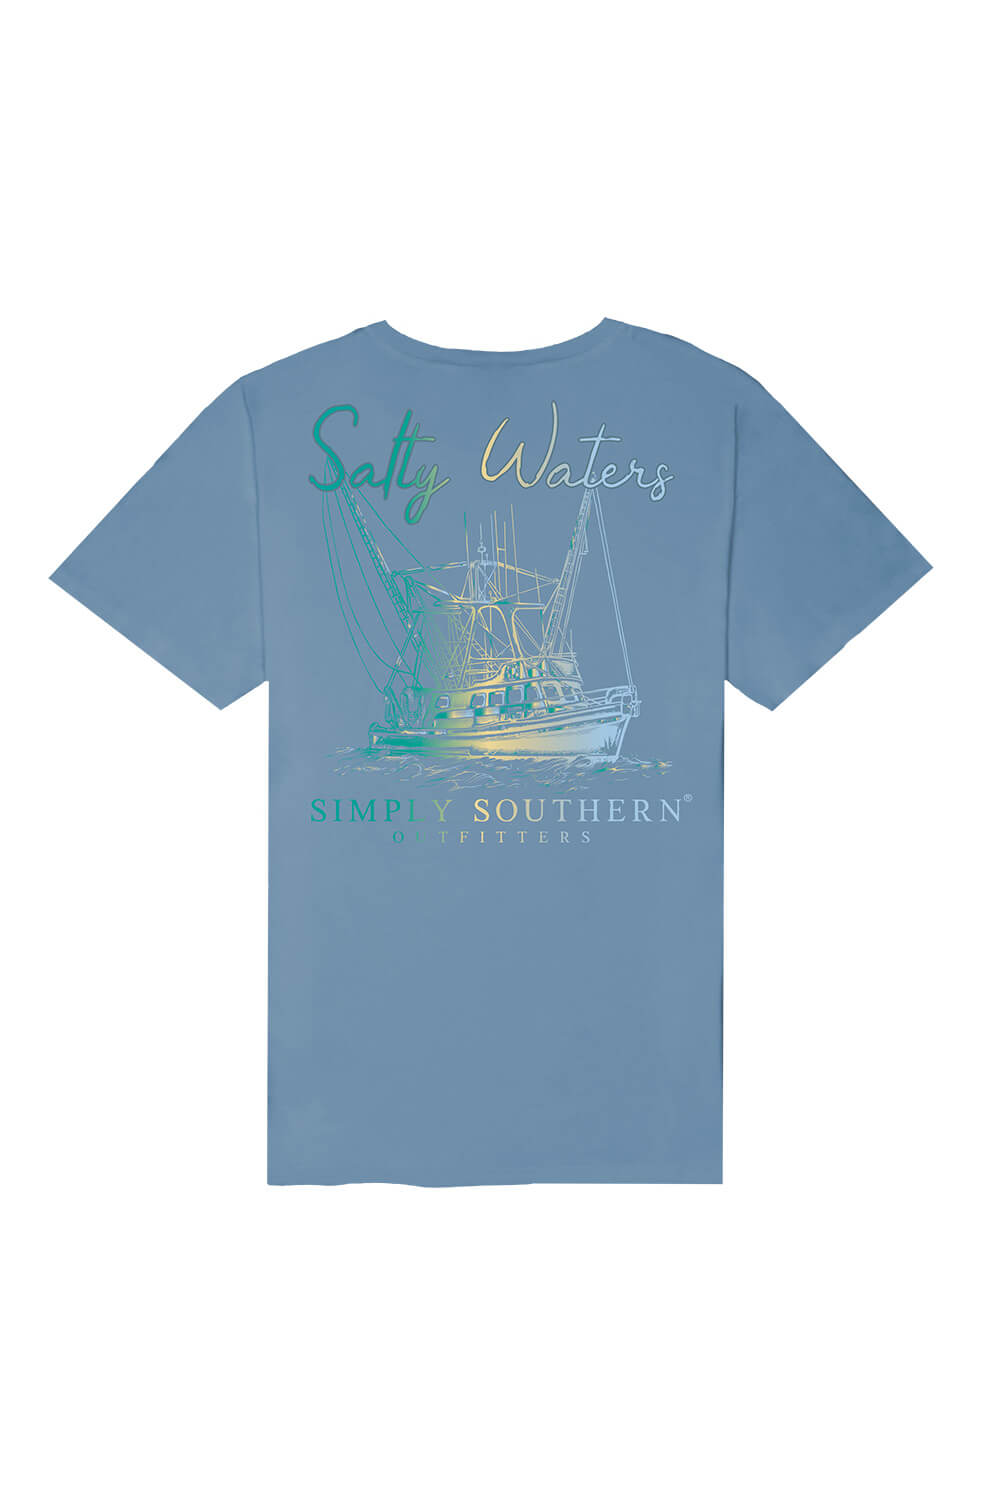 Simply Southern Boat & Salty Waters T-Shirt for Men in Blue